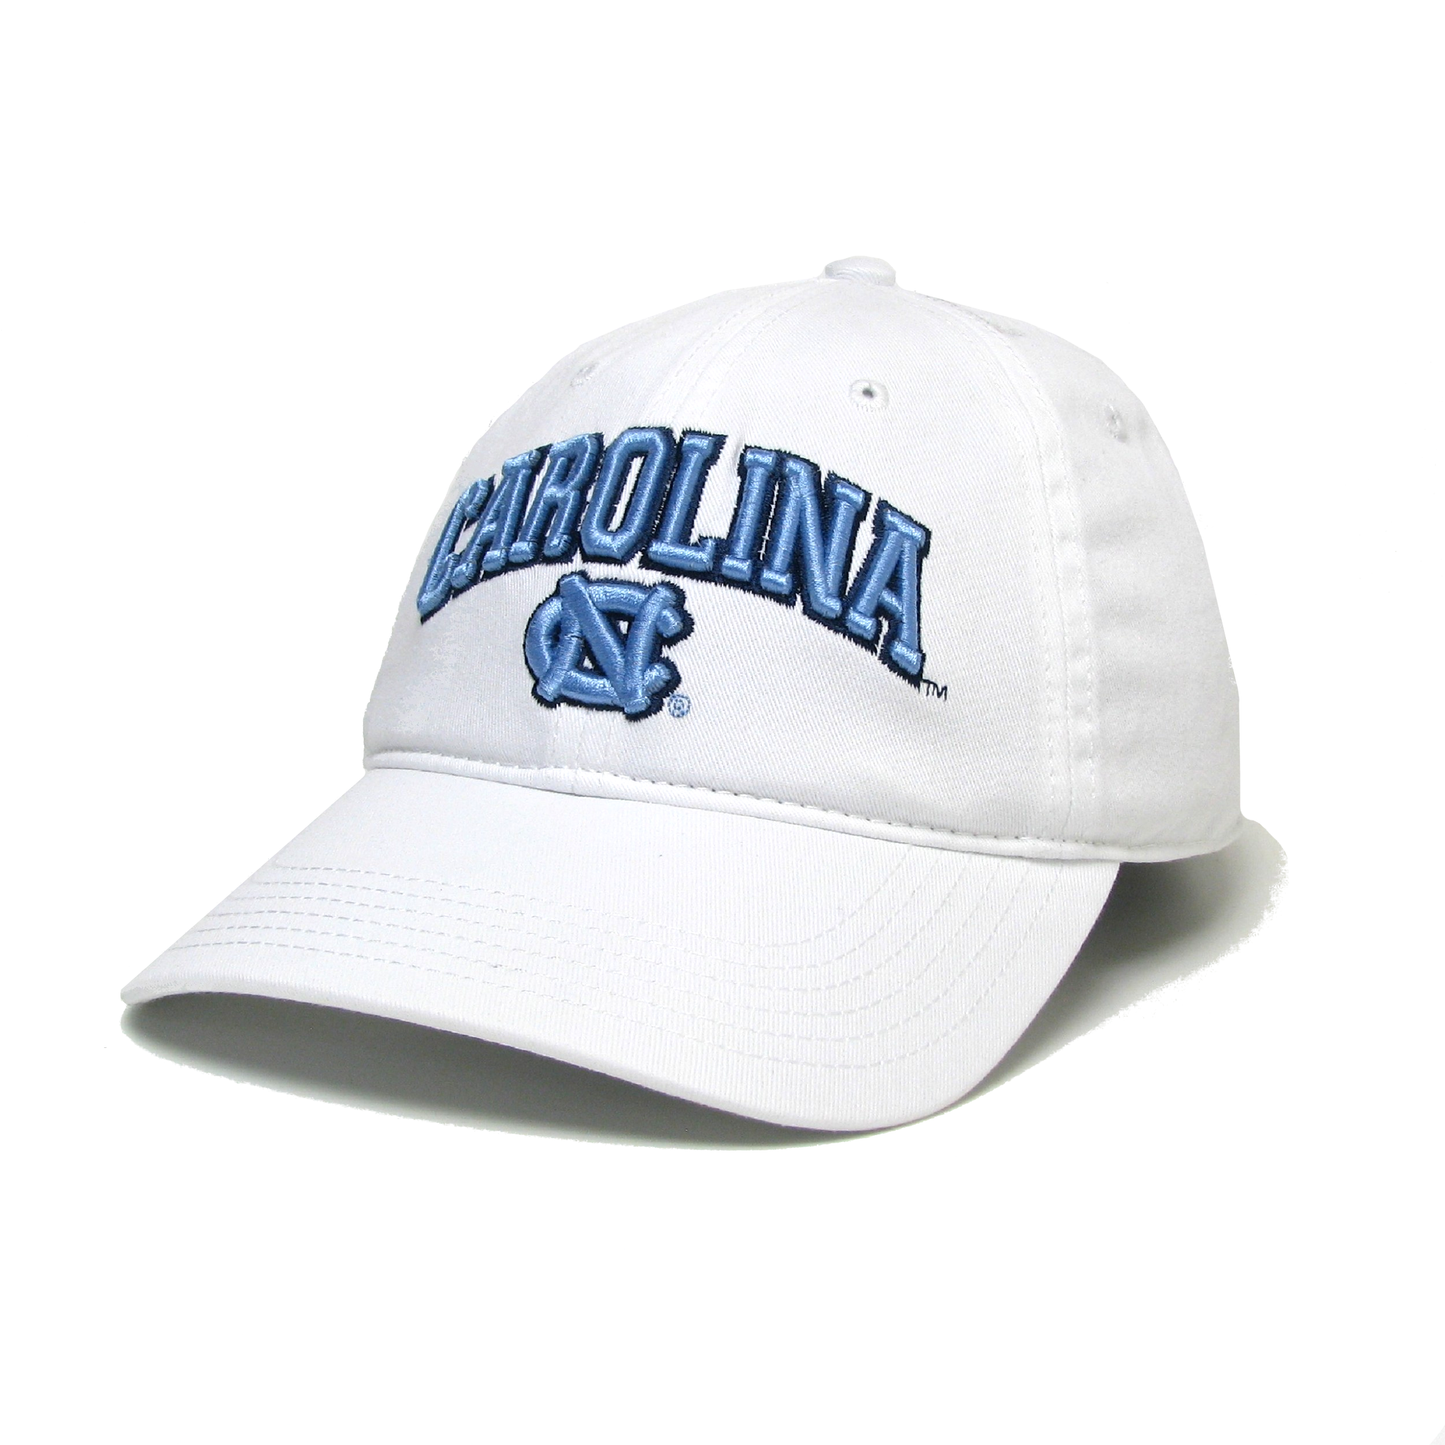 UNC Hat in White with Carolina Tar Heels Main Event Logo